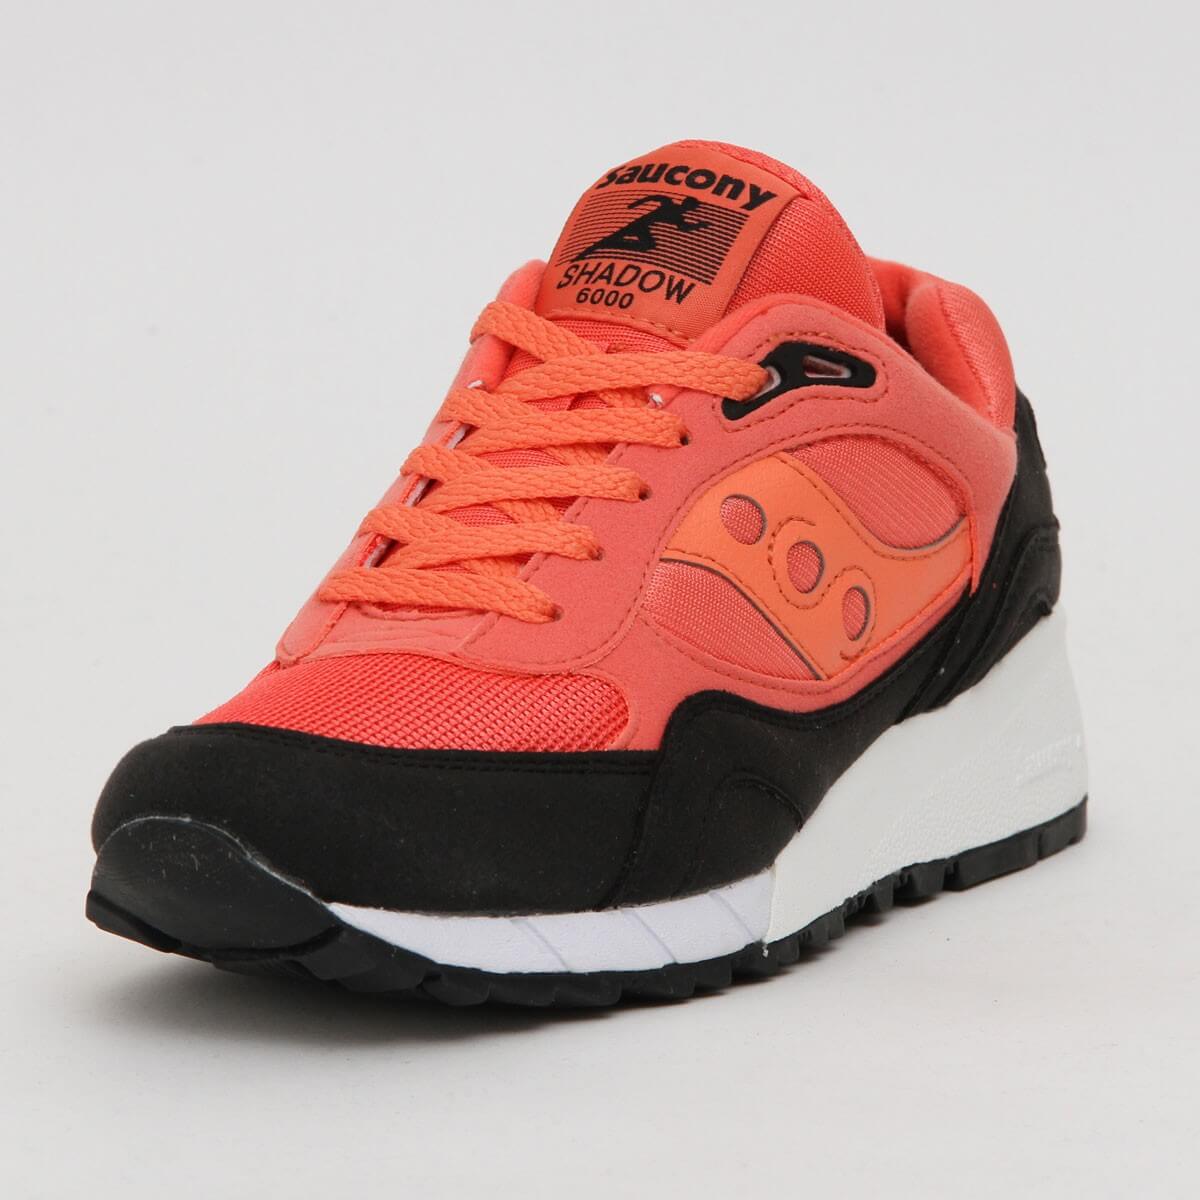 saucony shadow 6000 red black off 54 